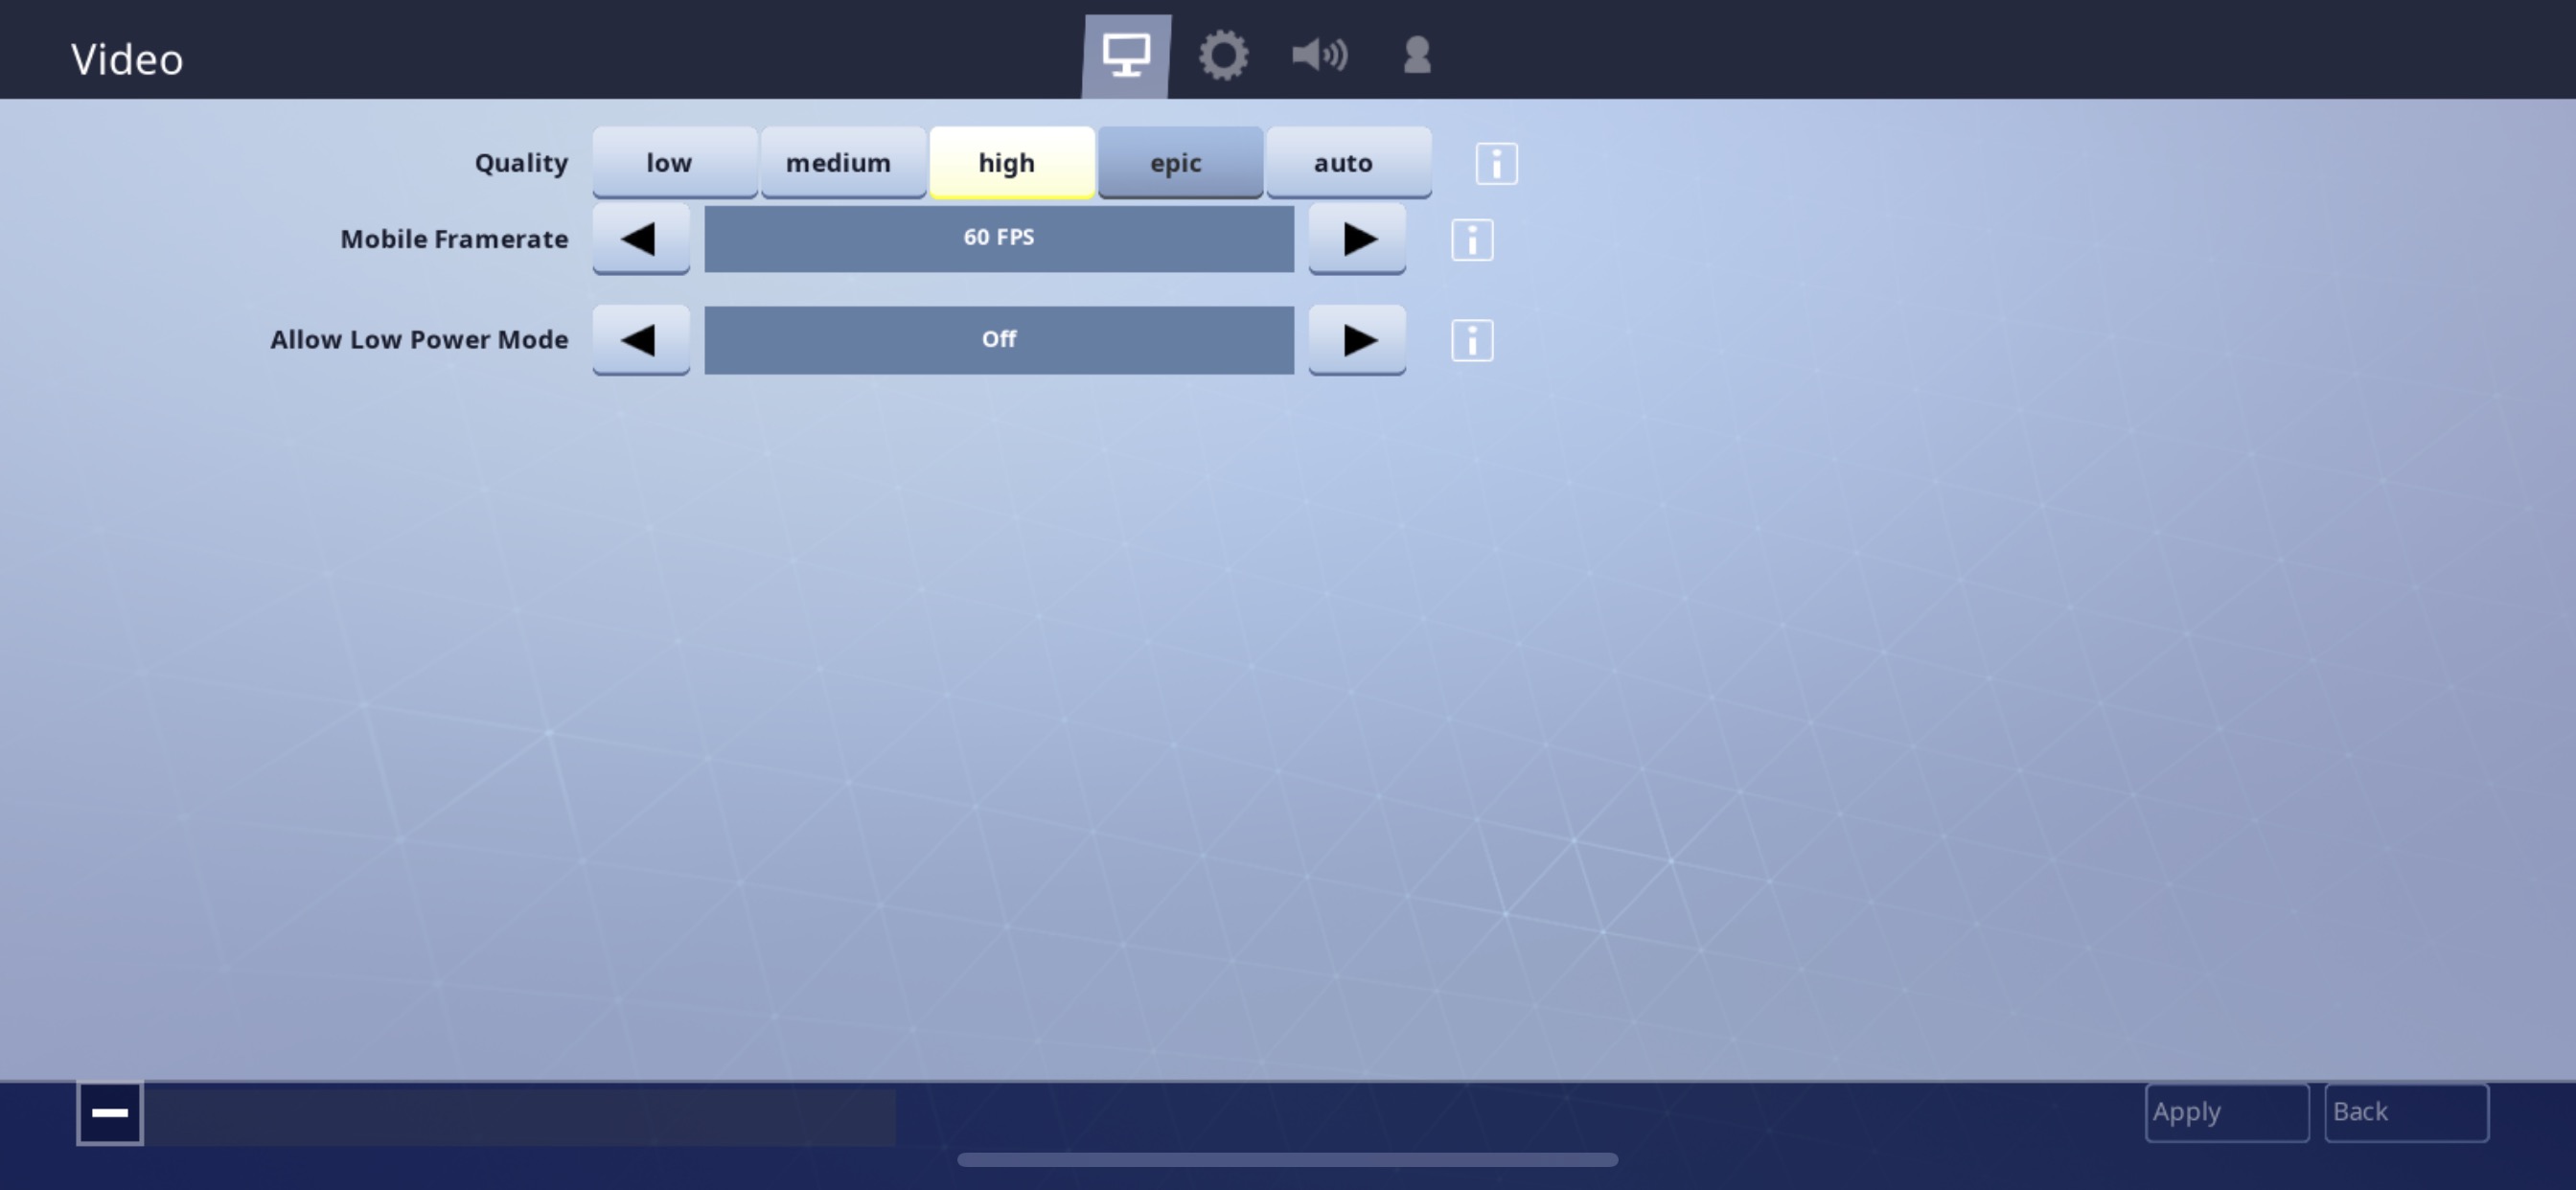 Fortnite Patch 6 31 Brings 60fps Gameplay To Select Ios Devices - a few ios devices since launch fortnite has supported up to 30fps gameplay on ios but things change today eric sent me the image below of where you